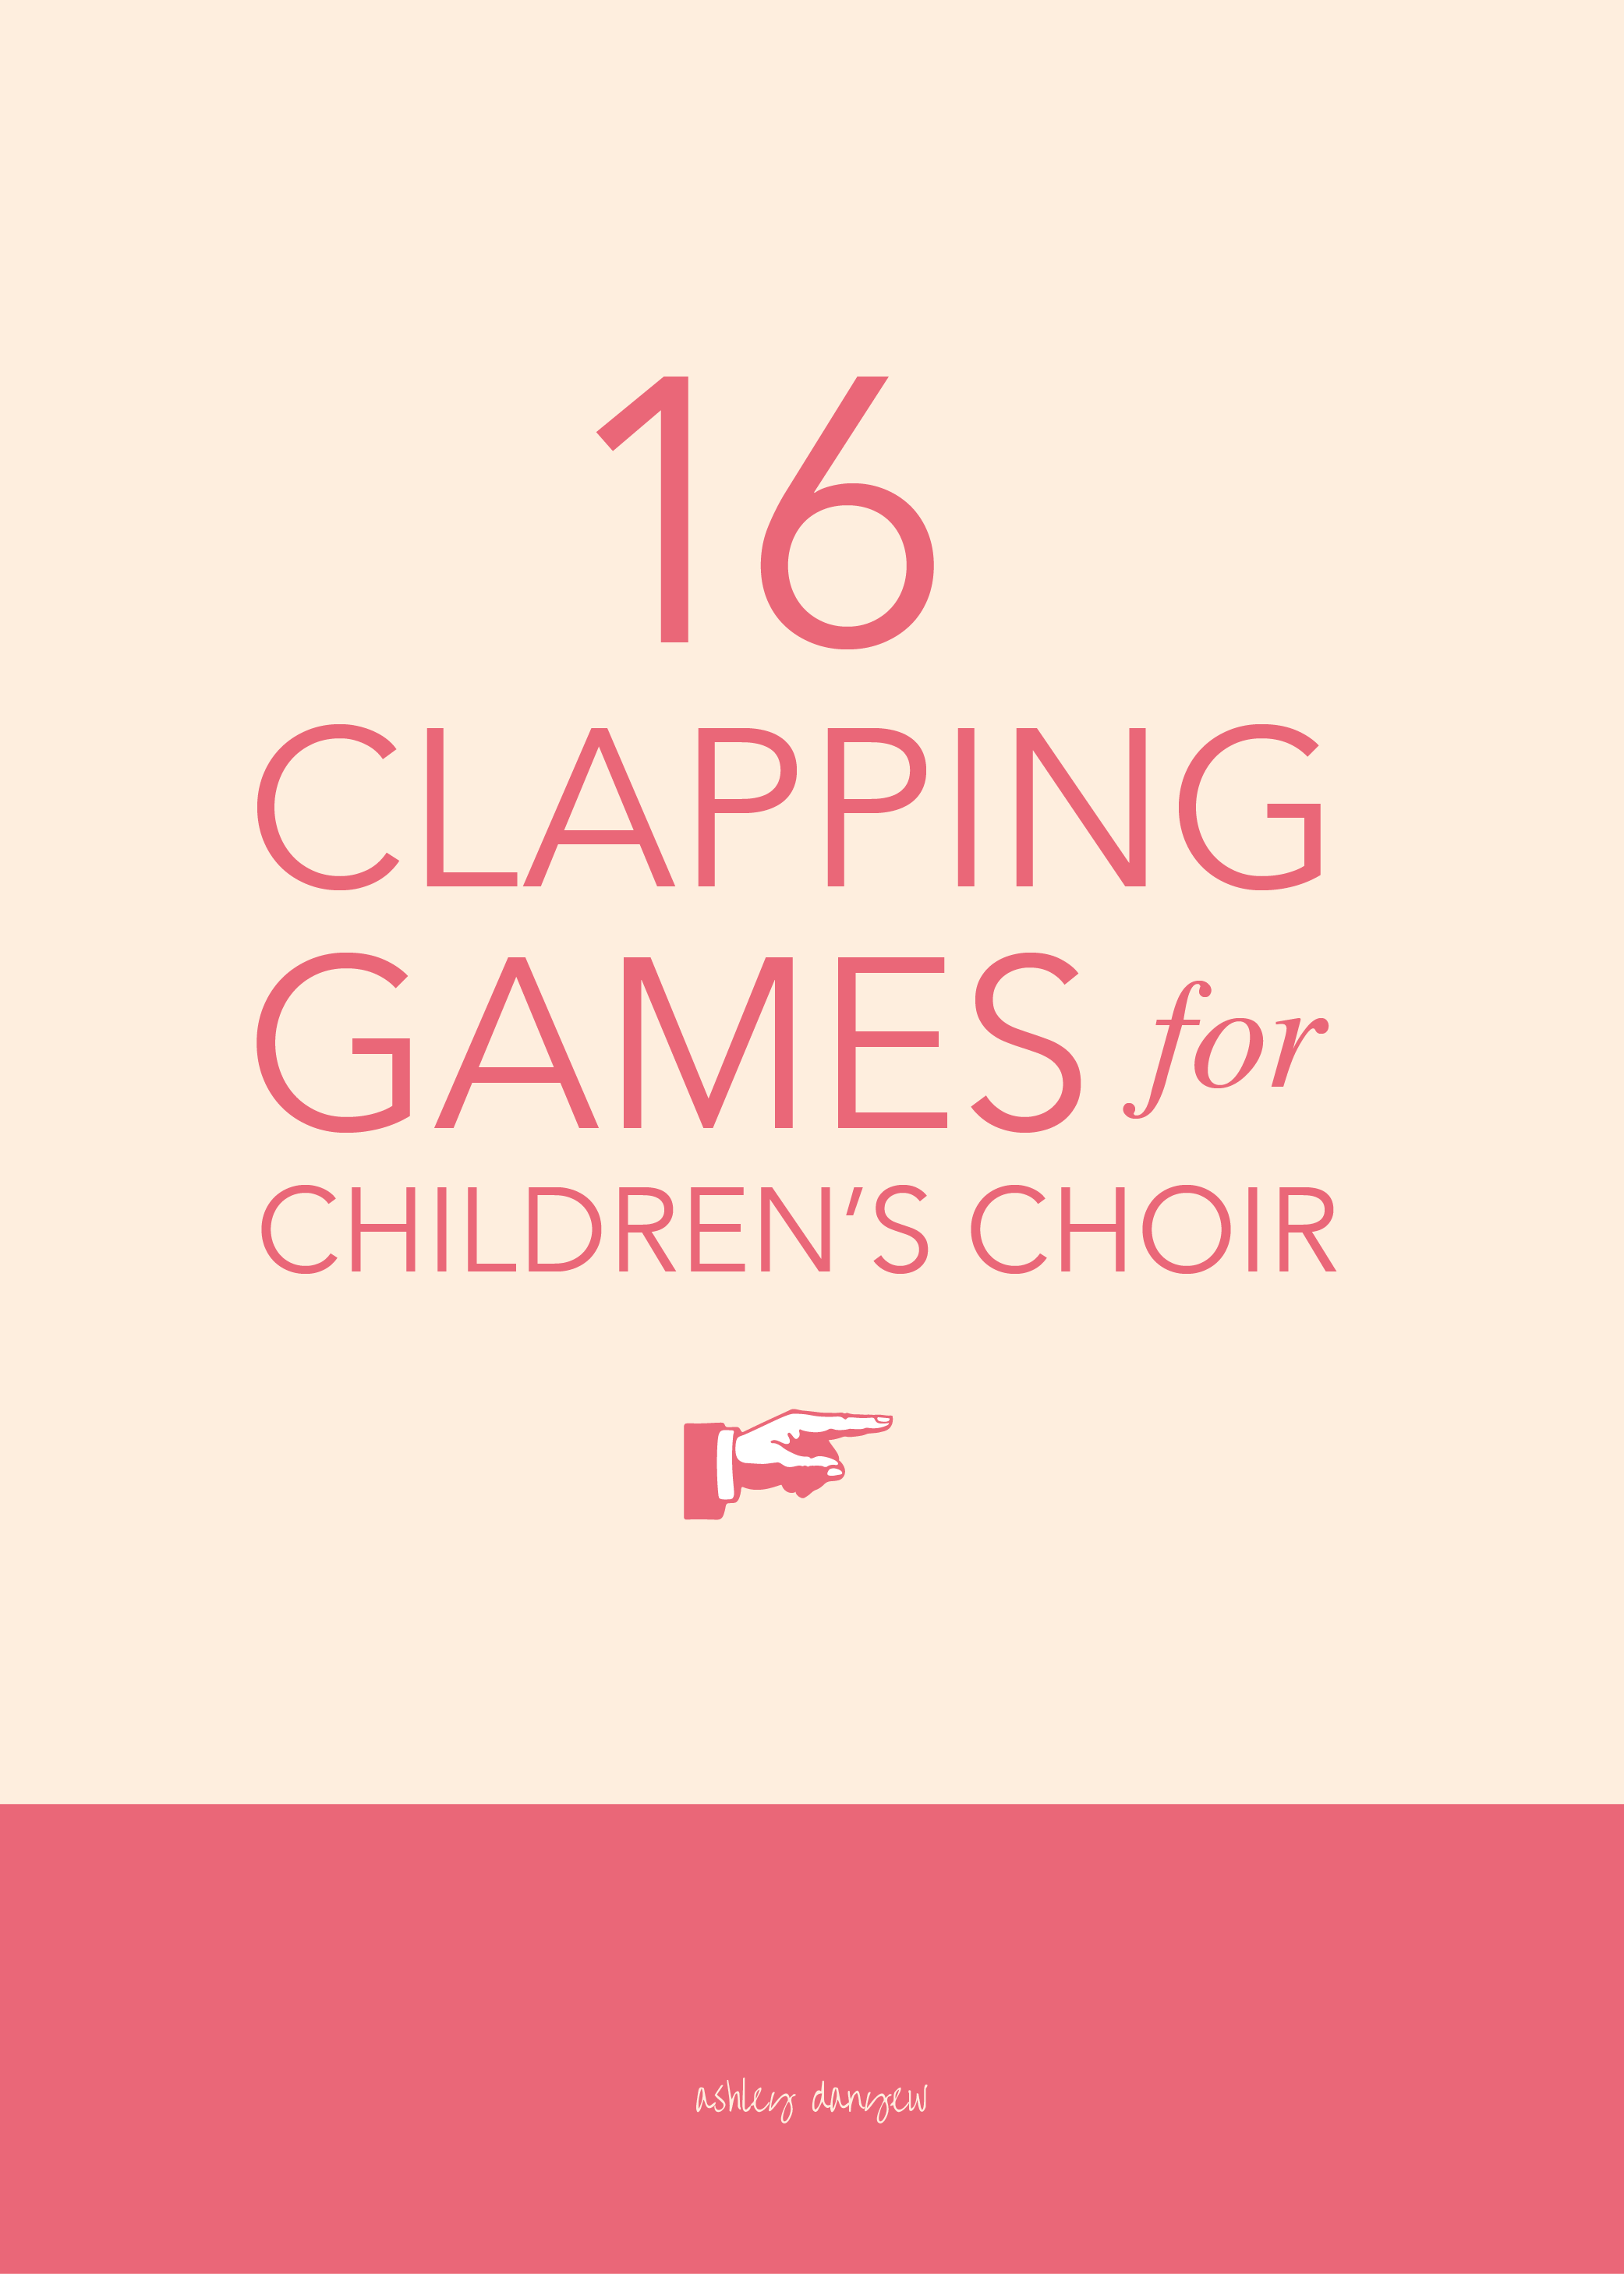 16 Clapping Games for Children's Choir-01.png